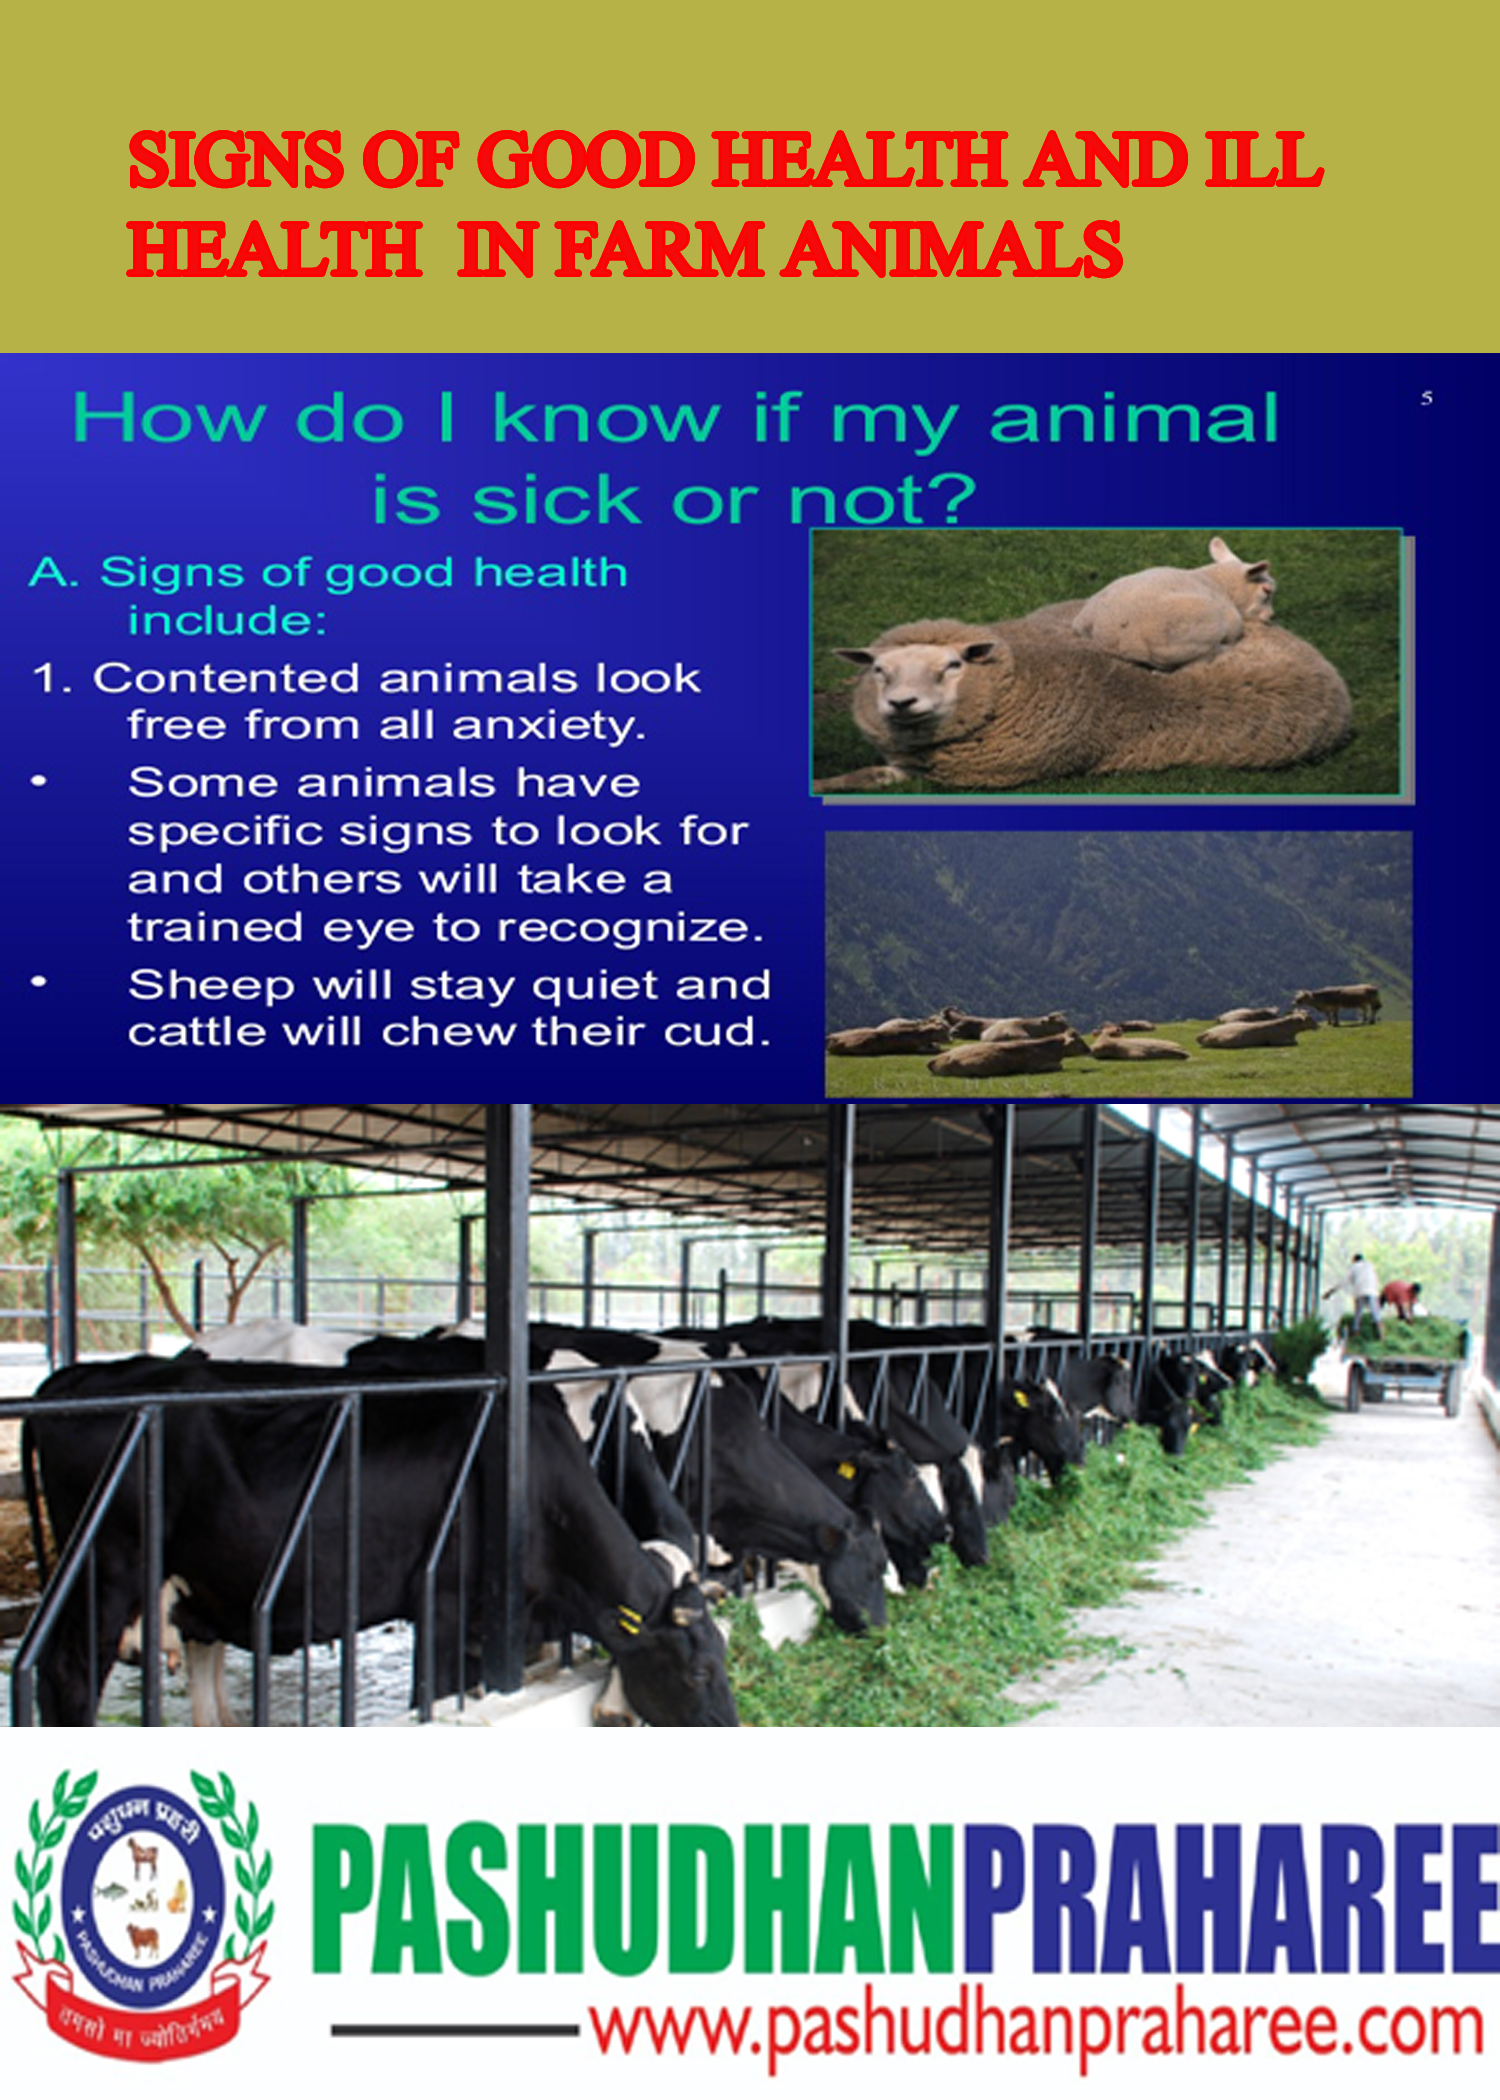 SIGNS OF GOOD HEALTH AND ILL HEALTH IN FARM ANIMALS – Pashudhan praharee